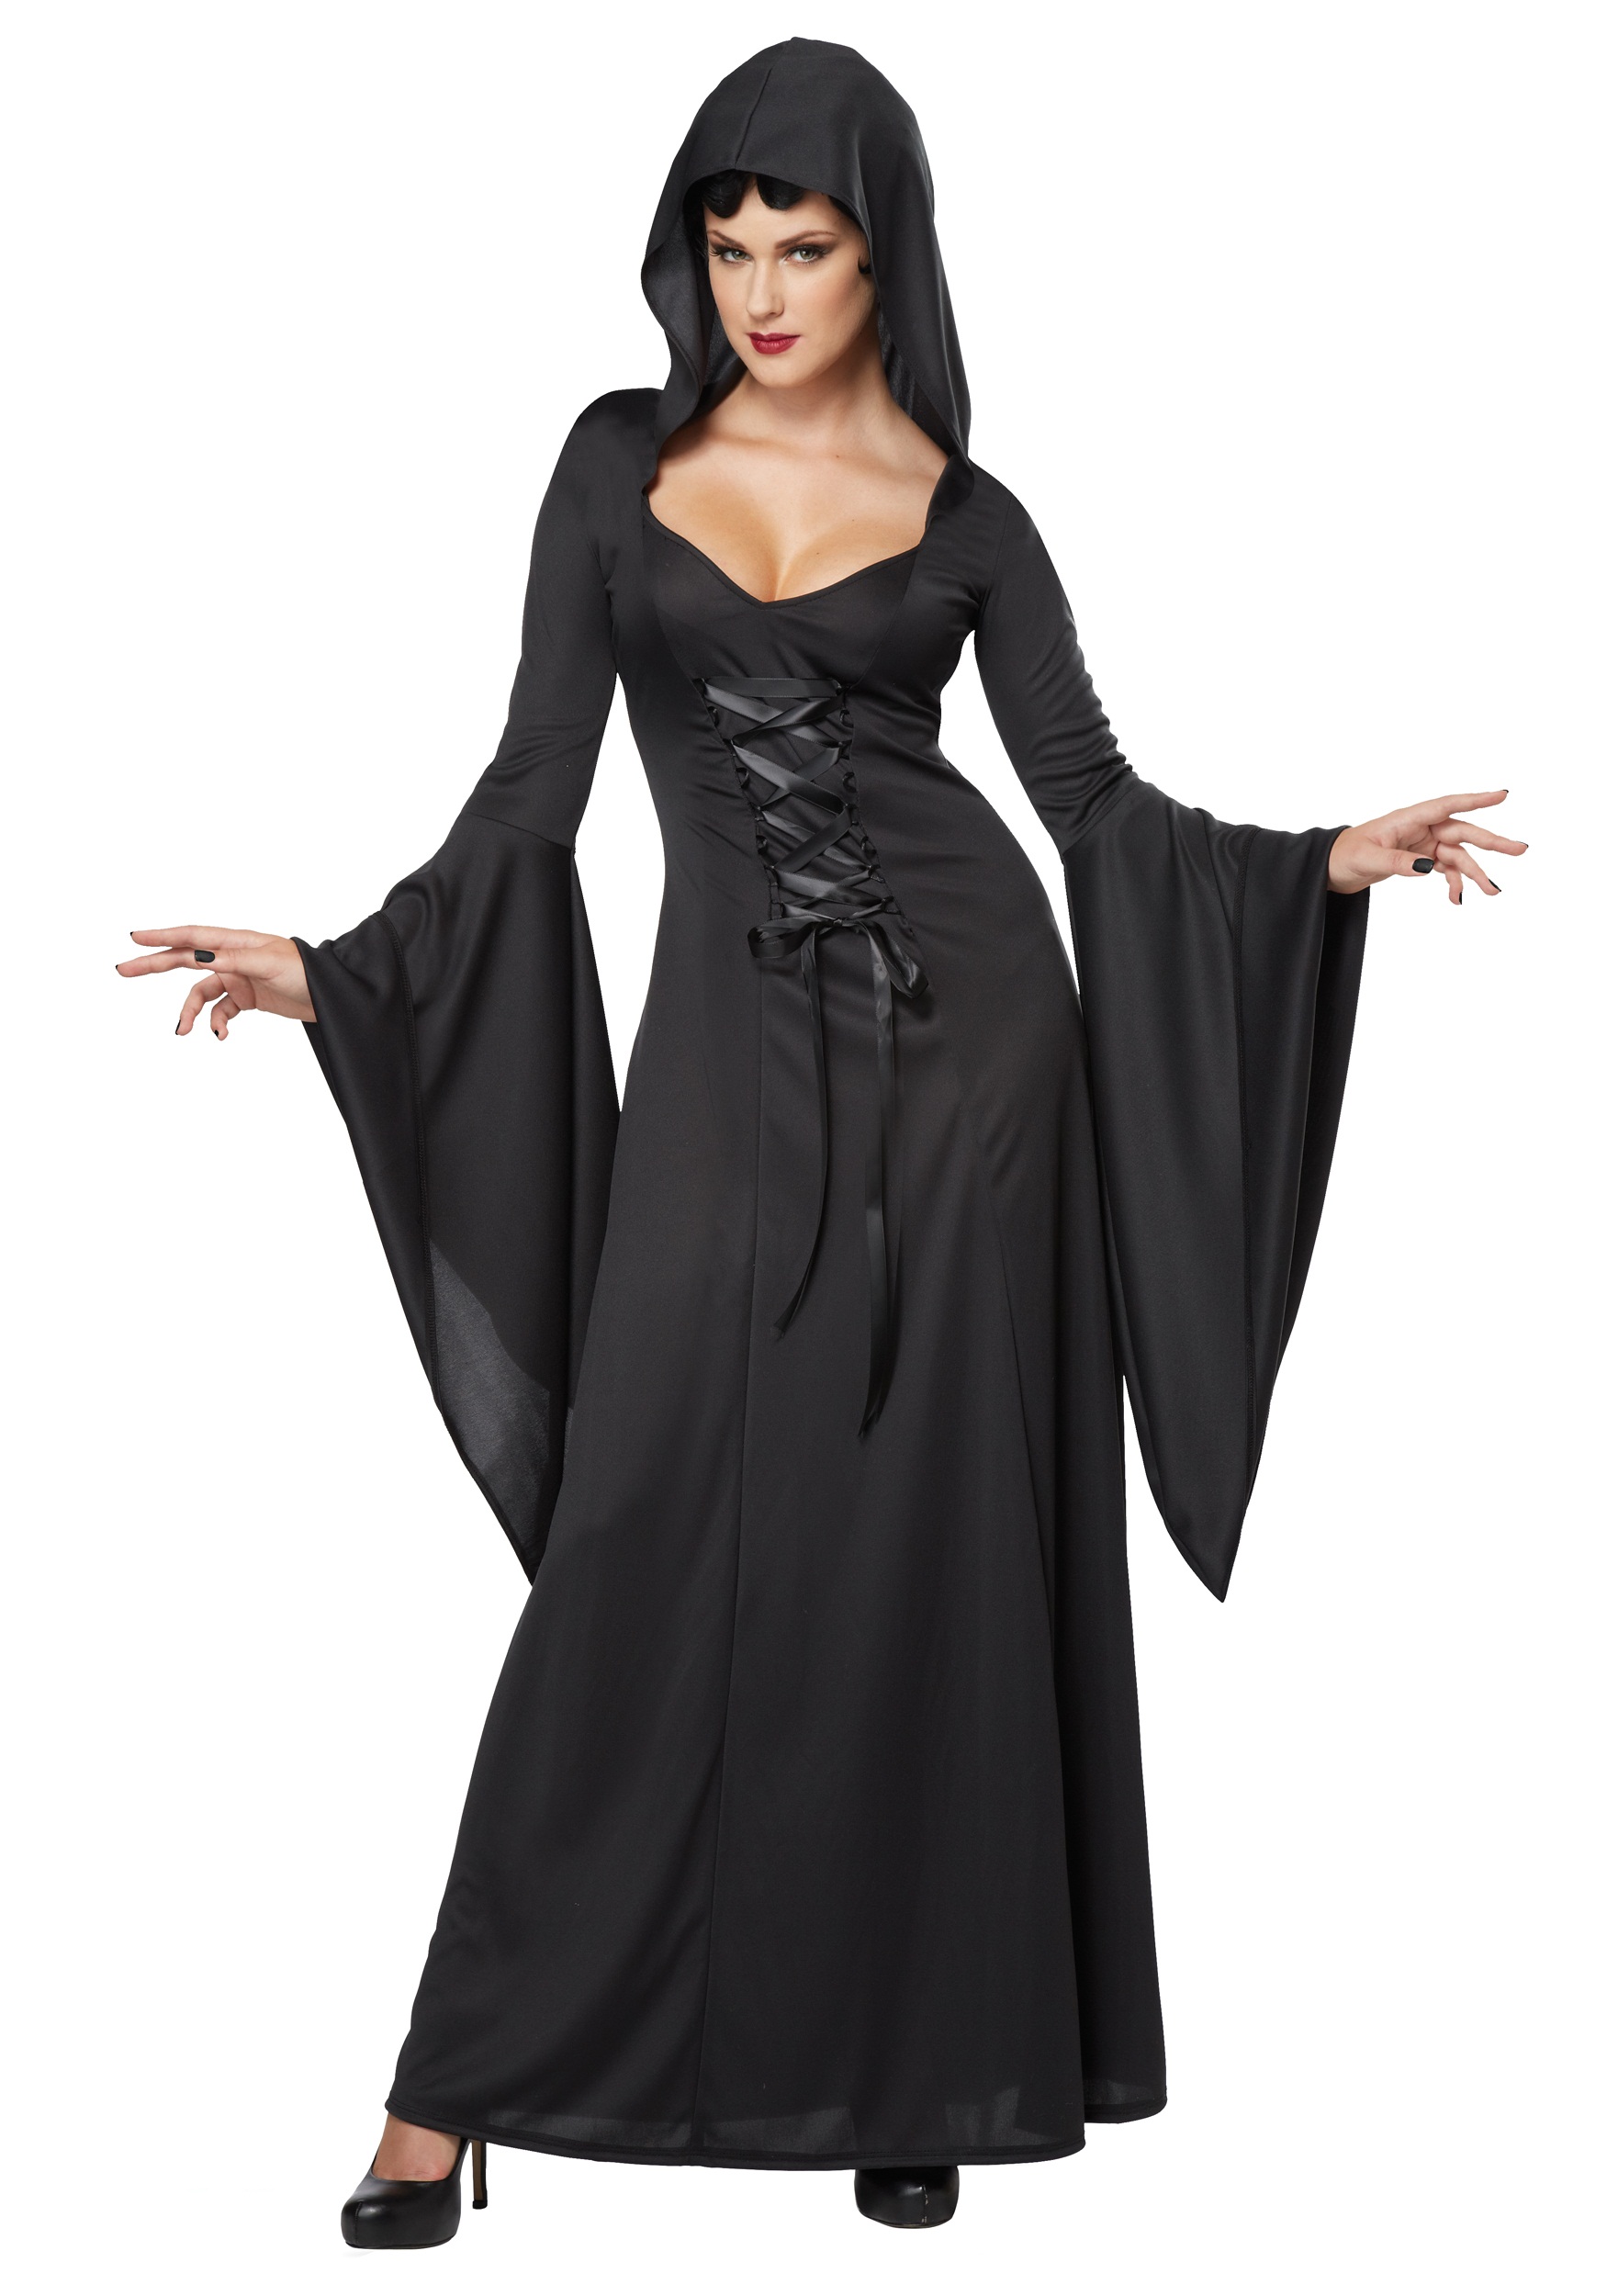 Photos - Fancy Dress California Costume Collection Women's Hooded Black Lace Up Robe Black CA01 